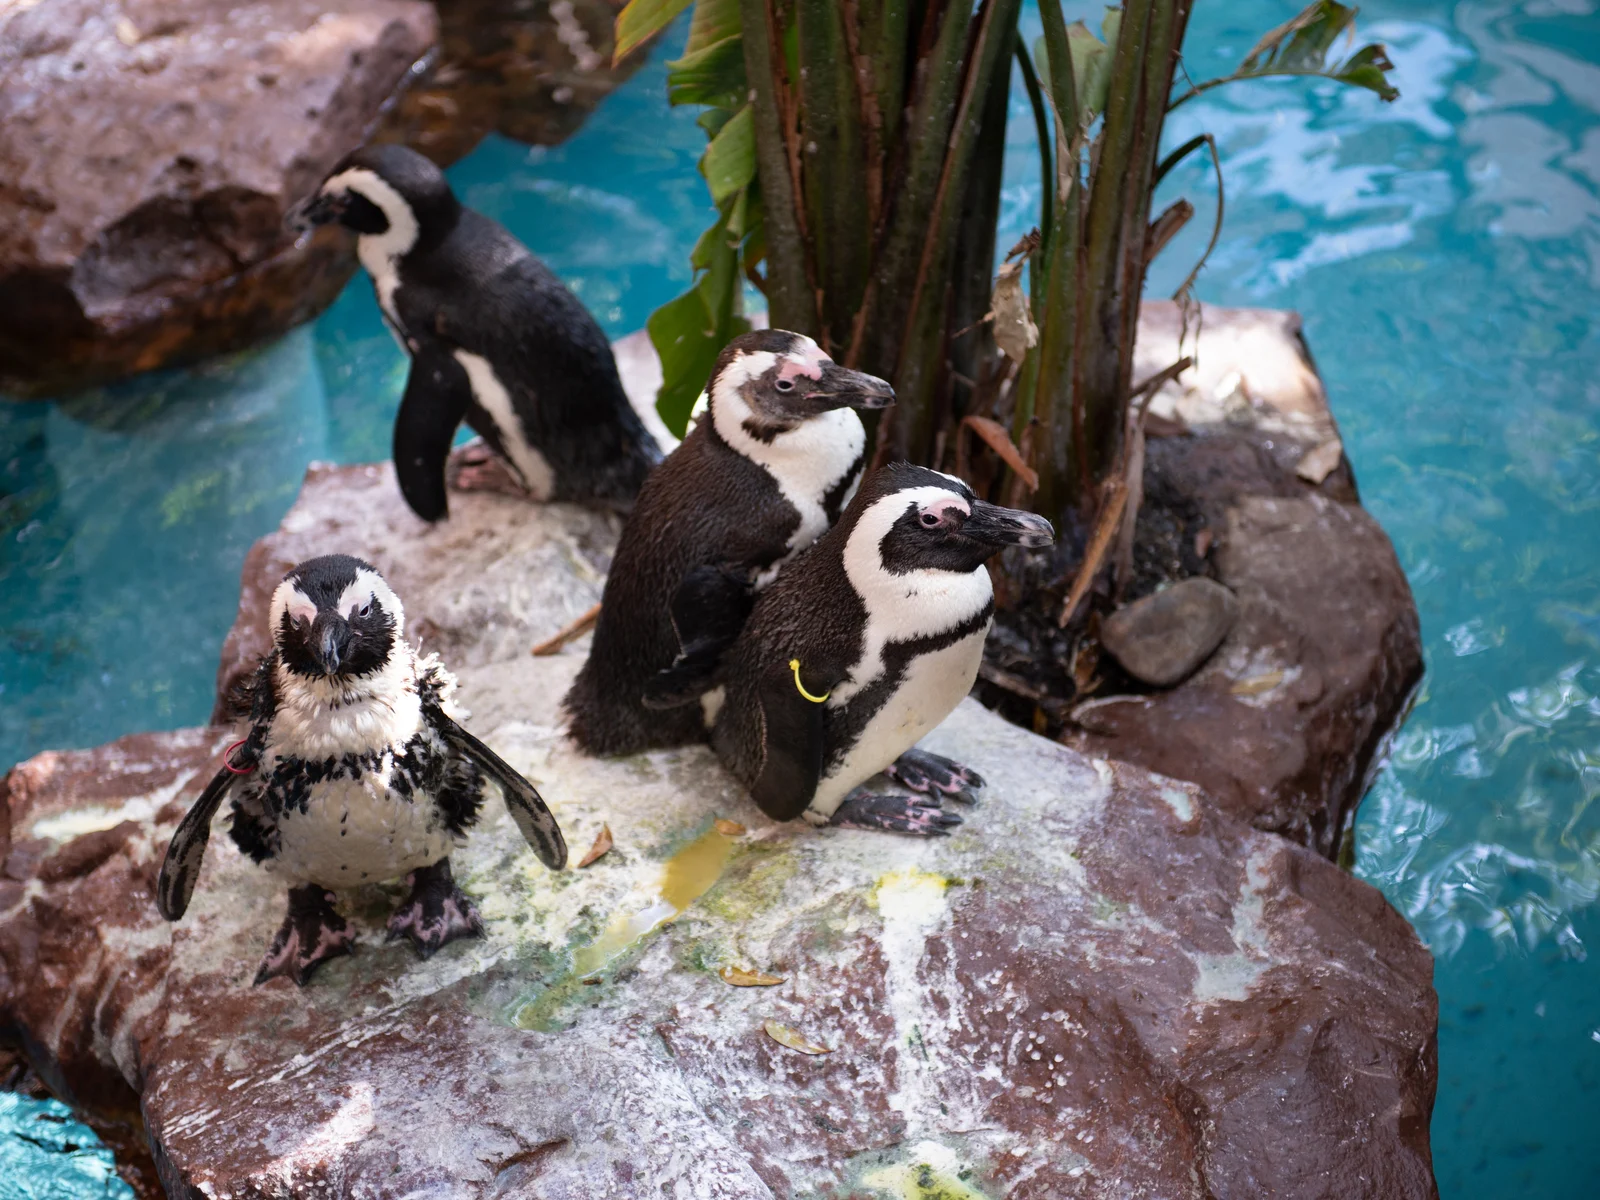 Penguins at one of the best things to do in Dallas, the World Aquarium